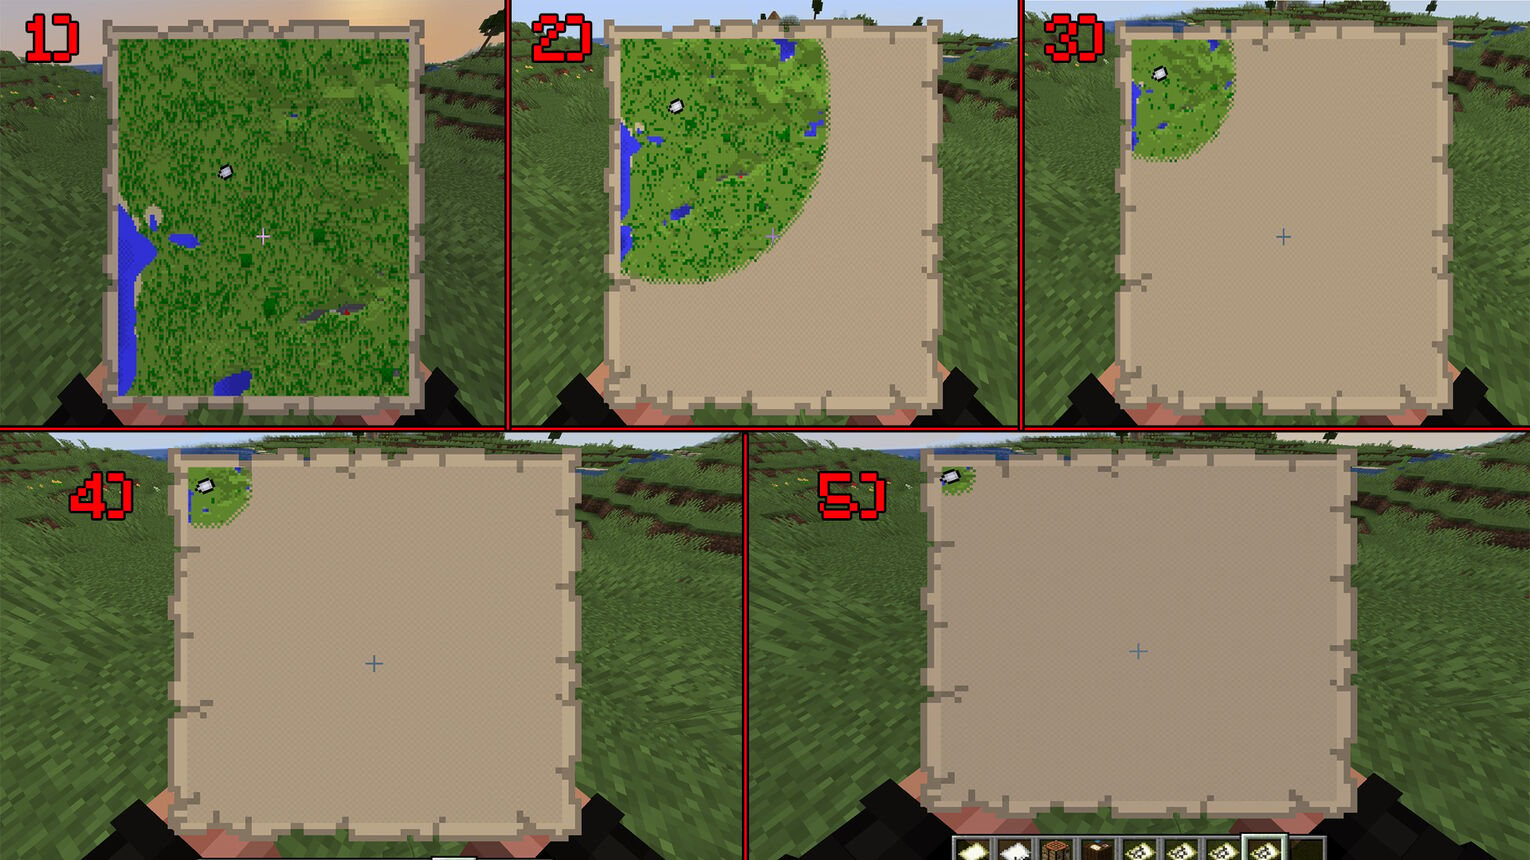 Minecraft Map Size Differences Bfac2ef581d5bb9296904d0482d7c77f 